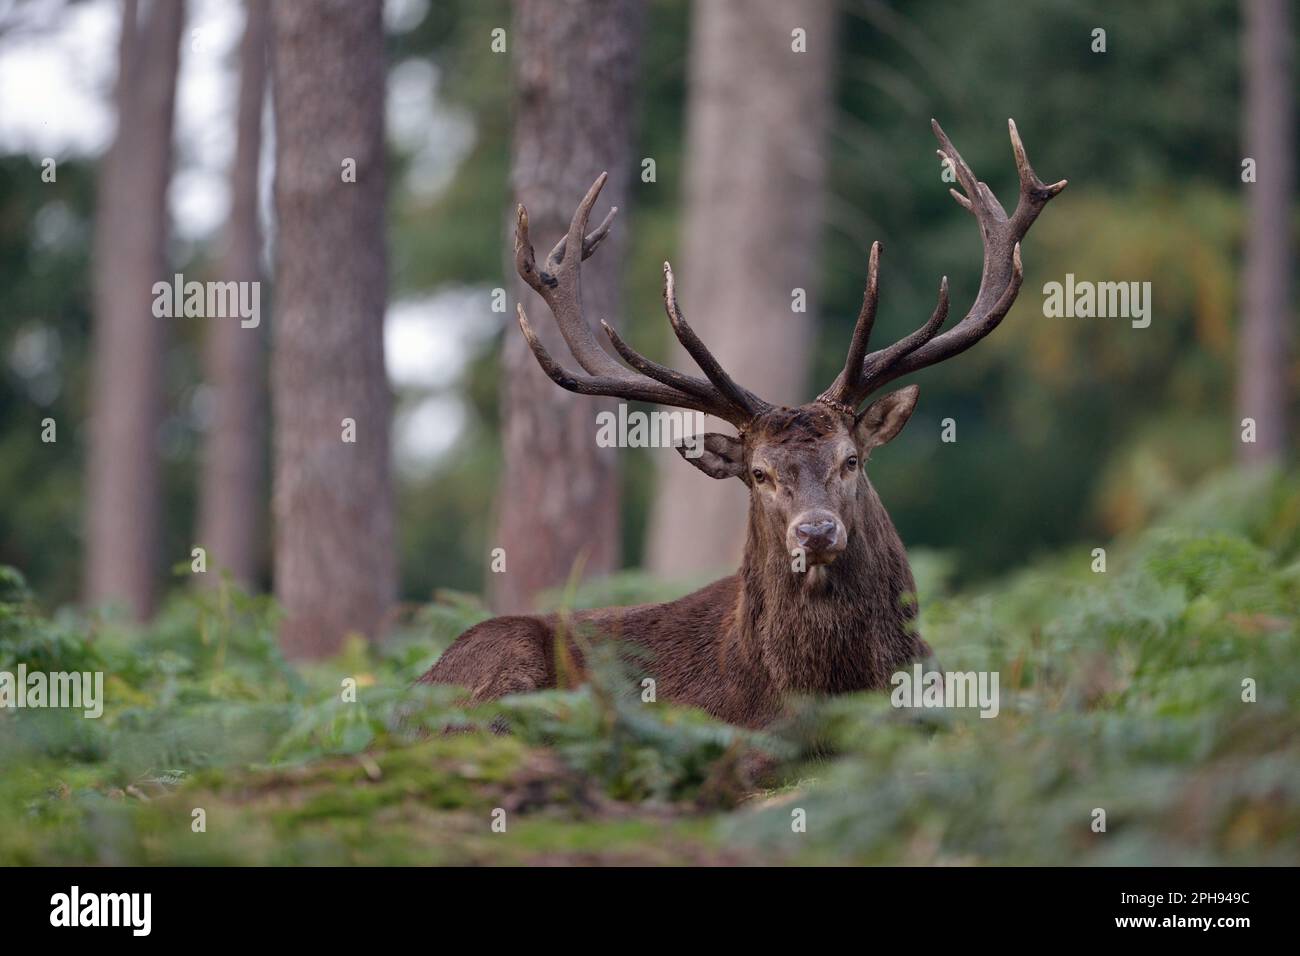 Eye contact... Red deer ( Cervus elaphus ) resting in the middle of the forest in the fern, lying on the ground Stock Photo